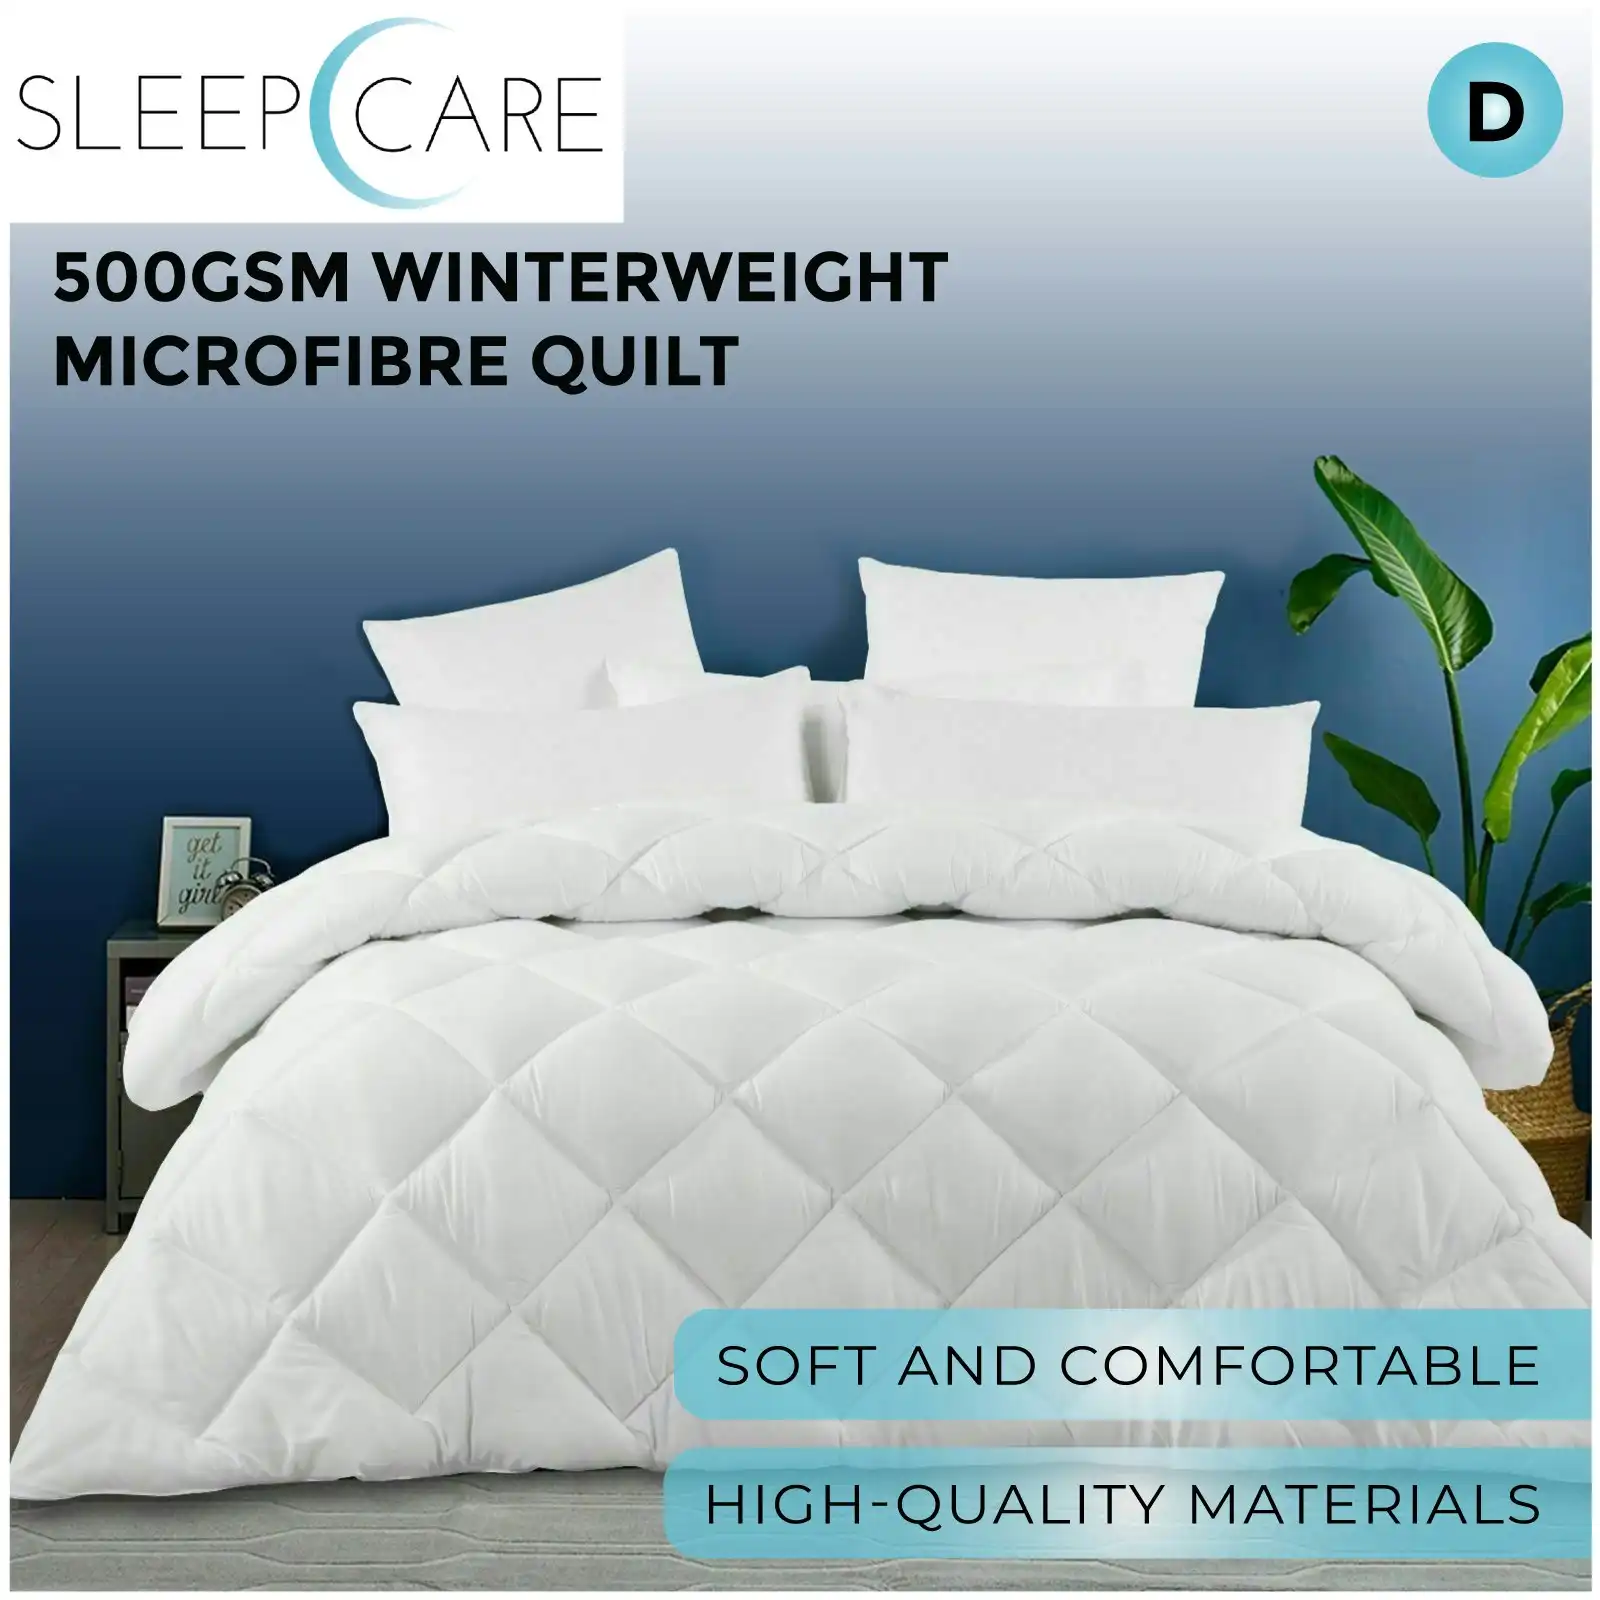 Sleepcare 500GSM Winterweight Microfibre Quilt Double Bed